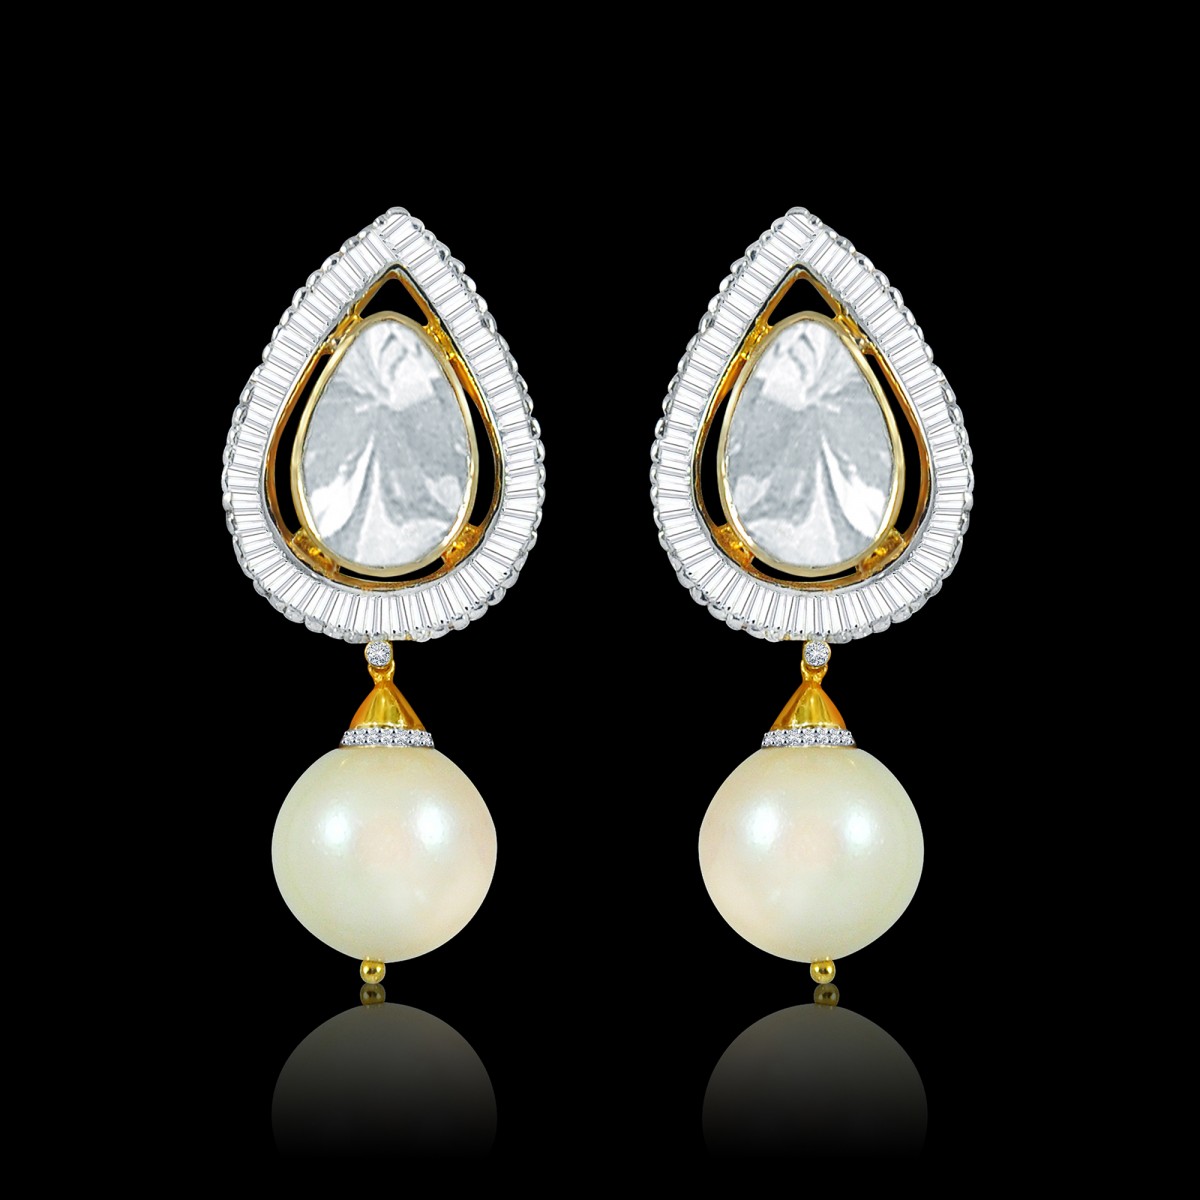 Make Your Bridal Look Stunner With These Polki Jewellery Designs